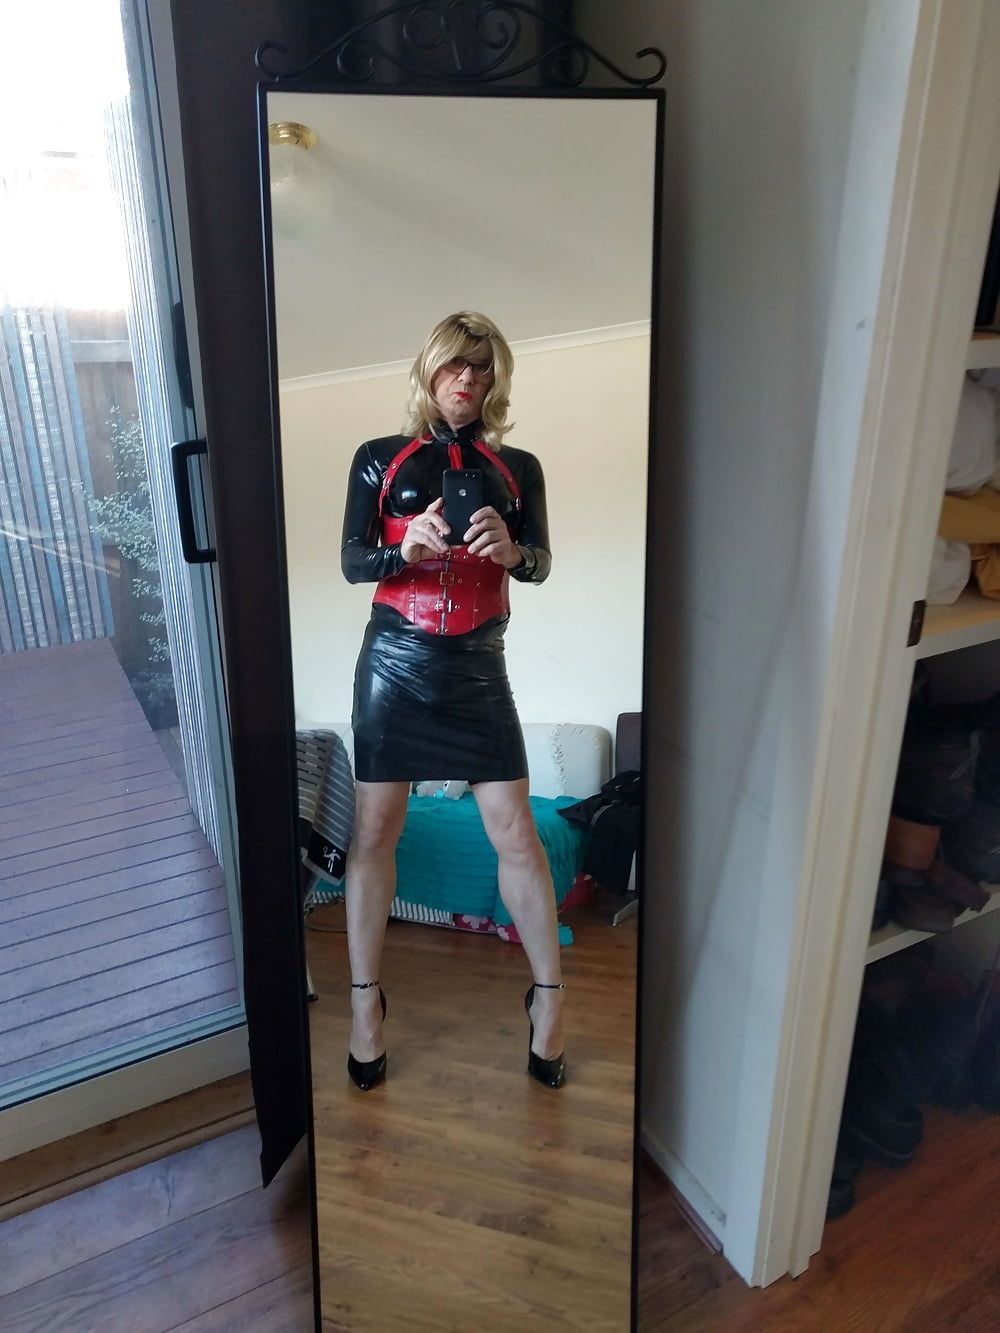 New latex skirt on a sunny Melbourne day